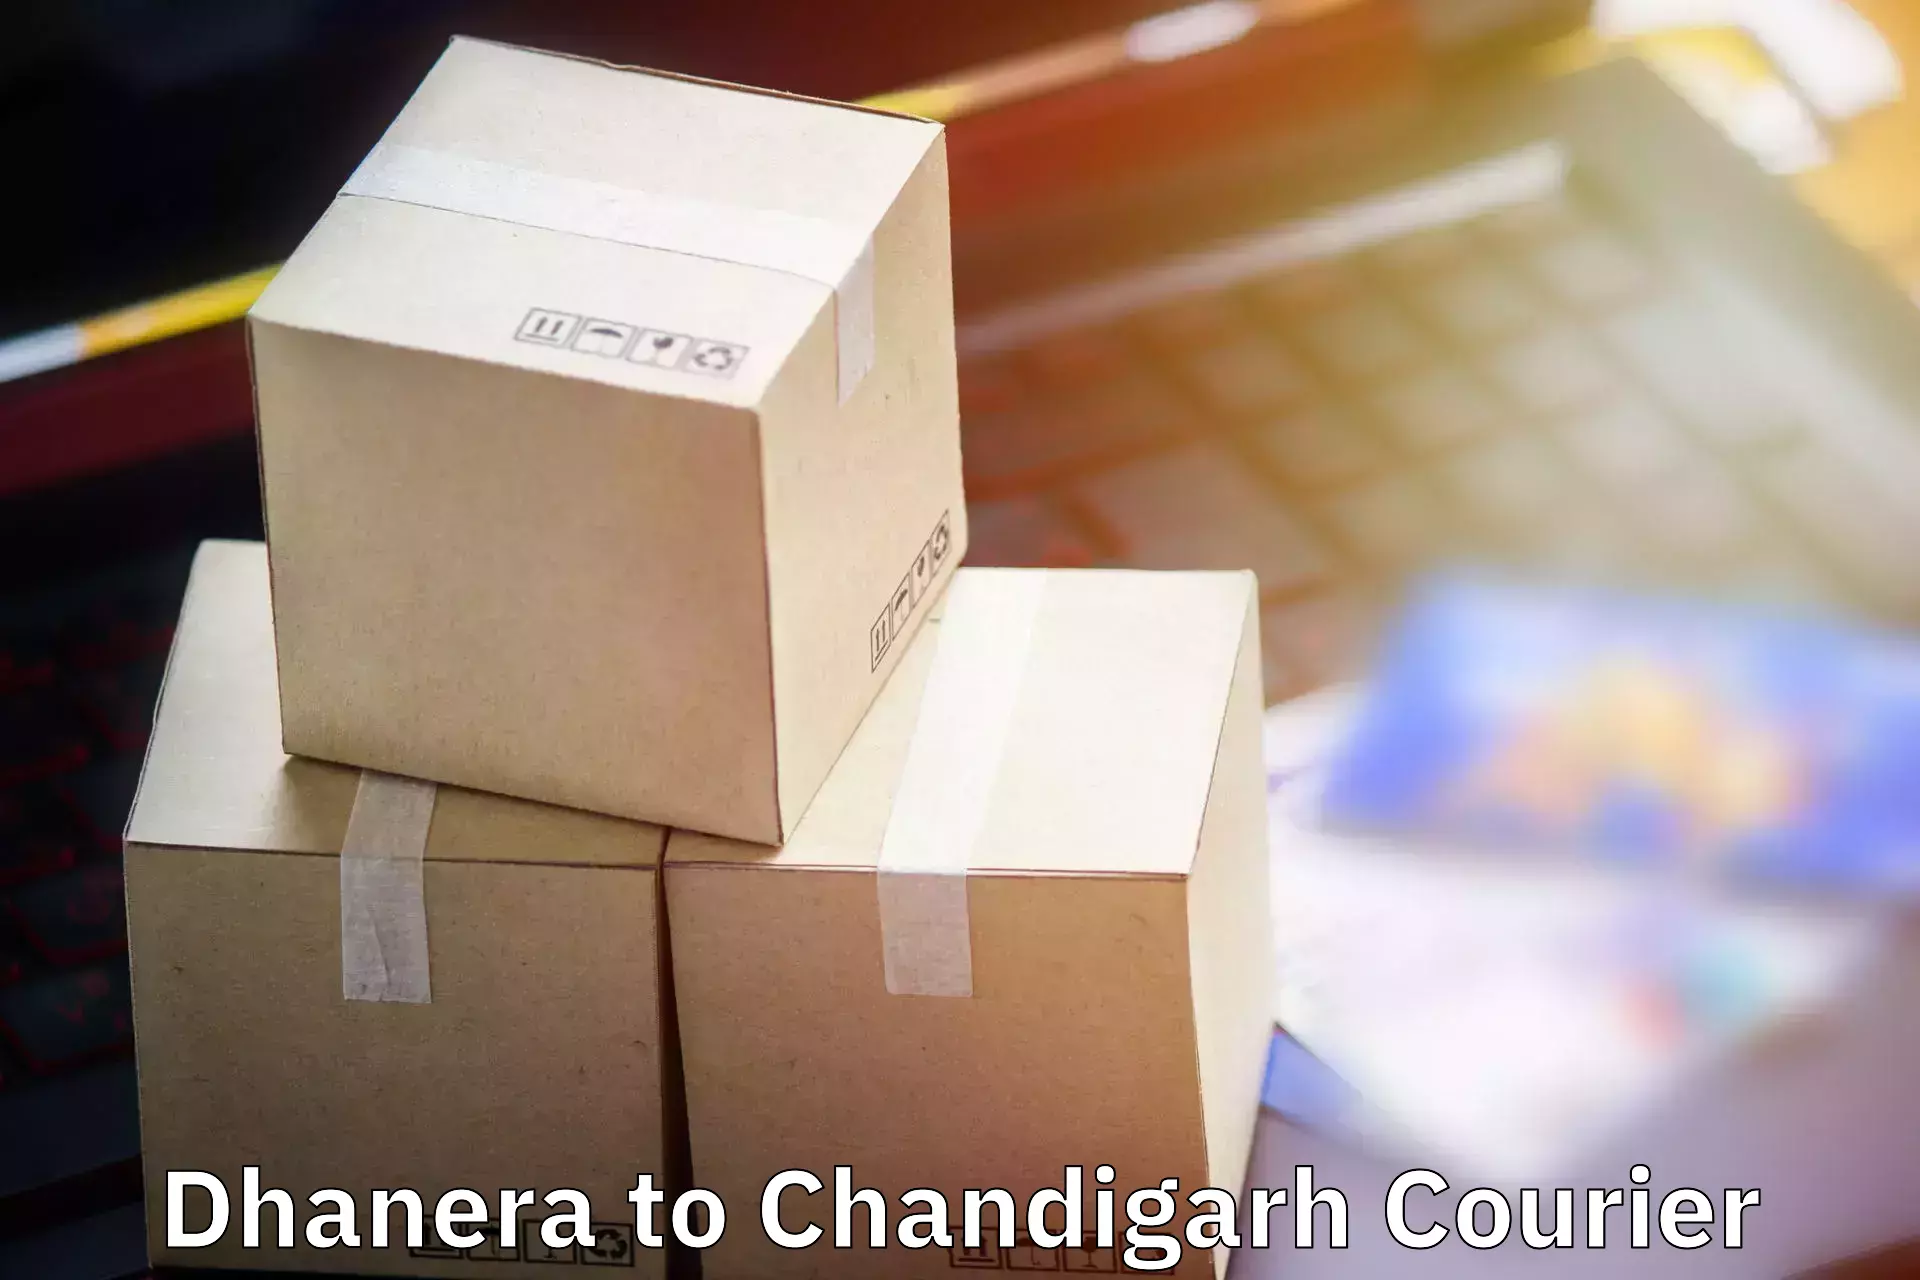 Luggage shipping specialists Dhanera to Chandigarh